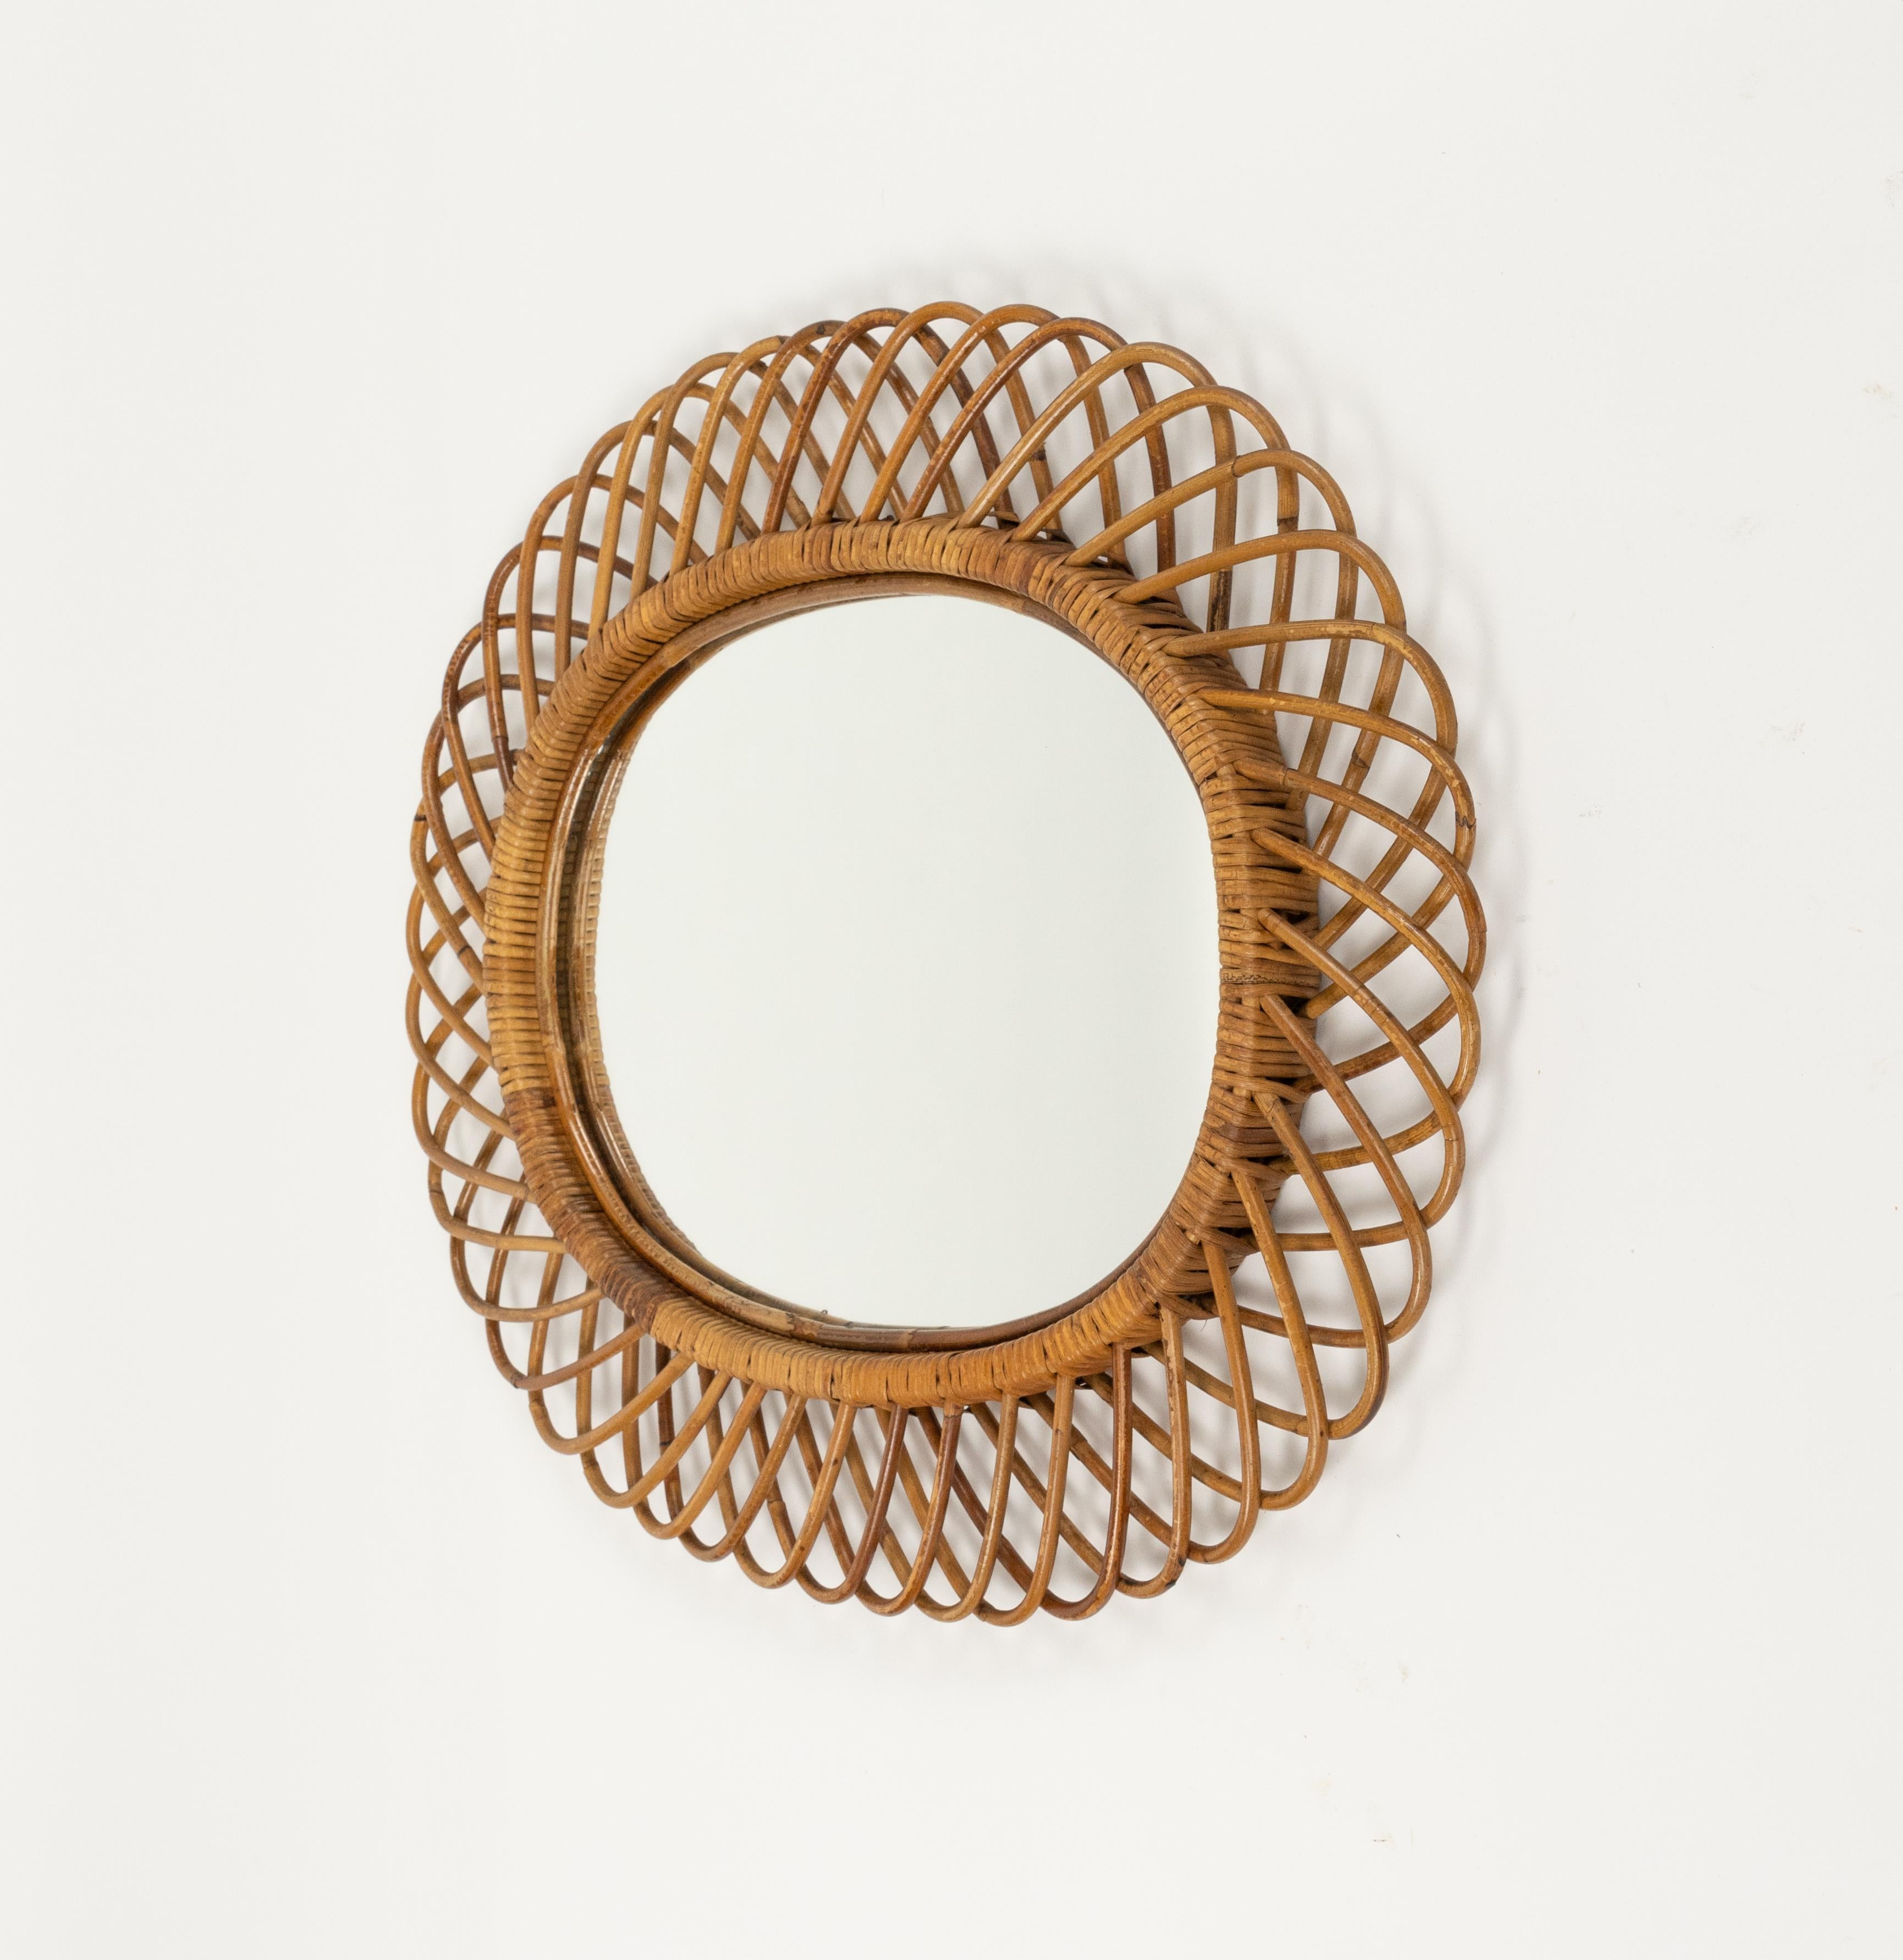 Midcentury Rattan and Bamboo Oval Wall Mirror by Franco Albini, Italy 1960s For Sale 2